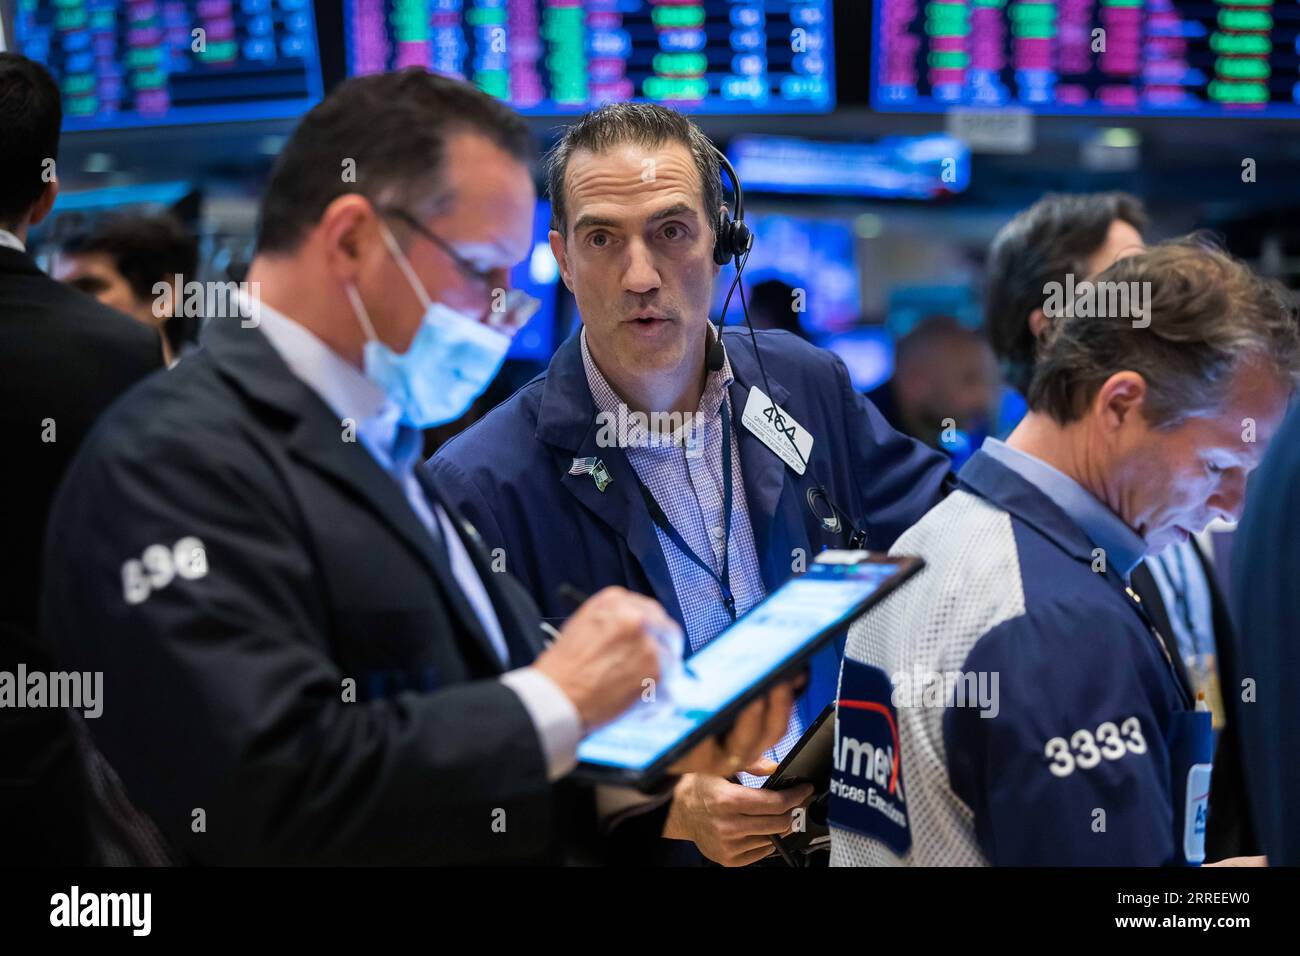 220224 -- NEW YORK, Feb. 24, 2022 -- Traders work at the New York Stock Exchange in New York, the United States, Feb. 24, 2022. U.S. stocks finished higher on Thursday, reversing the massive losses earlier in the session, as investors assessed the geopolitical tensions over Ukraine. The Dow Jones Industrial Average rose 92.07 points, or 0.28 percent, to 33,223.83. The S&P 500 climbed 63.20 points, or 1.50 percent, to 4,288.70. The Nasdaq Composite Index increased 436.09 points, or 3.34 percent, to 13,473.58. Earlier in the day, all the three major indexes fell sharply with the Dow dropping mor Stock Photo